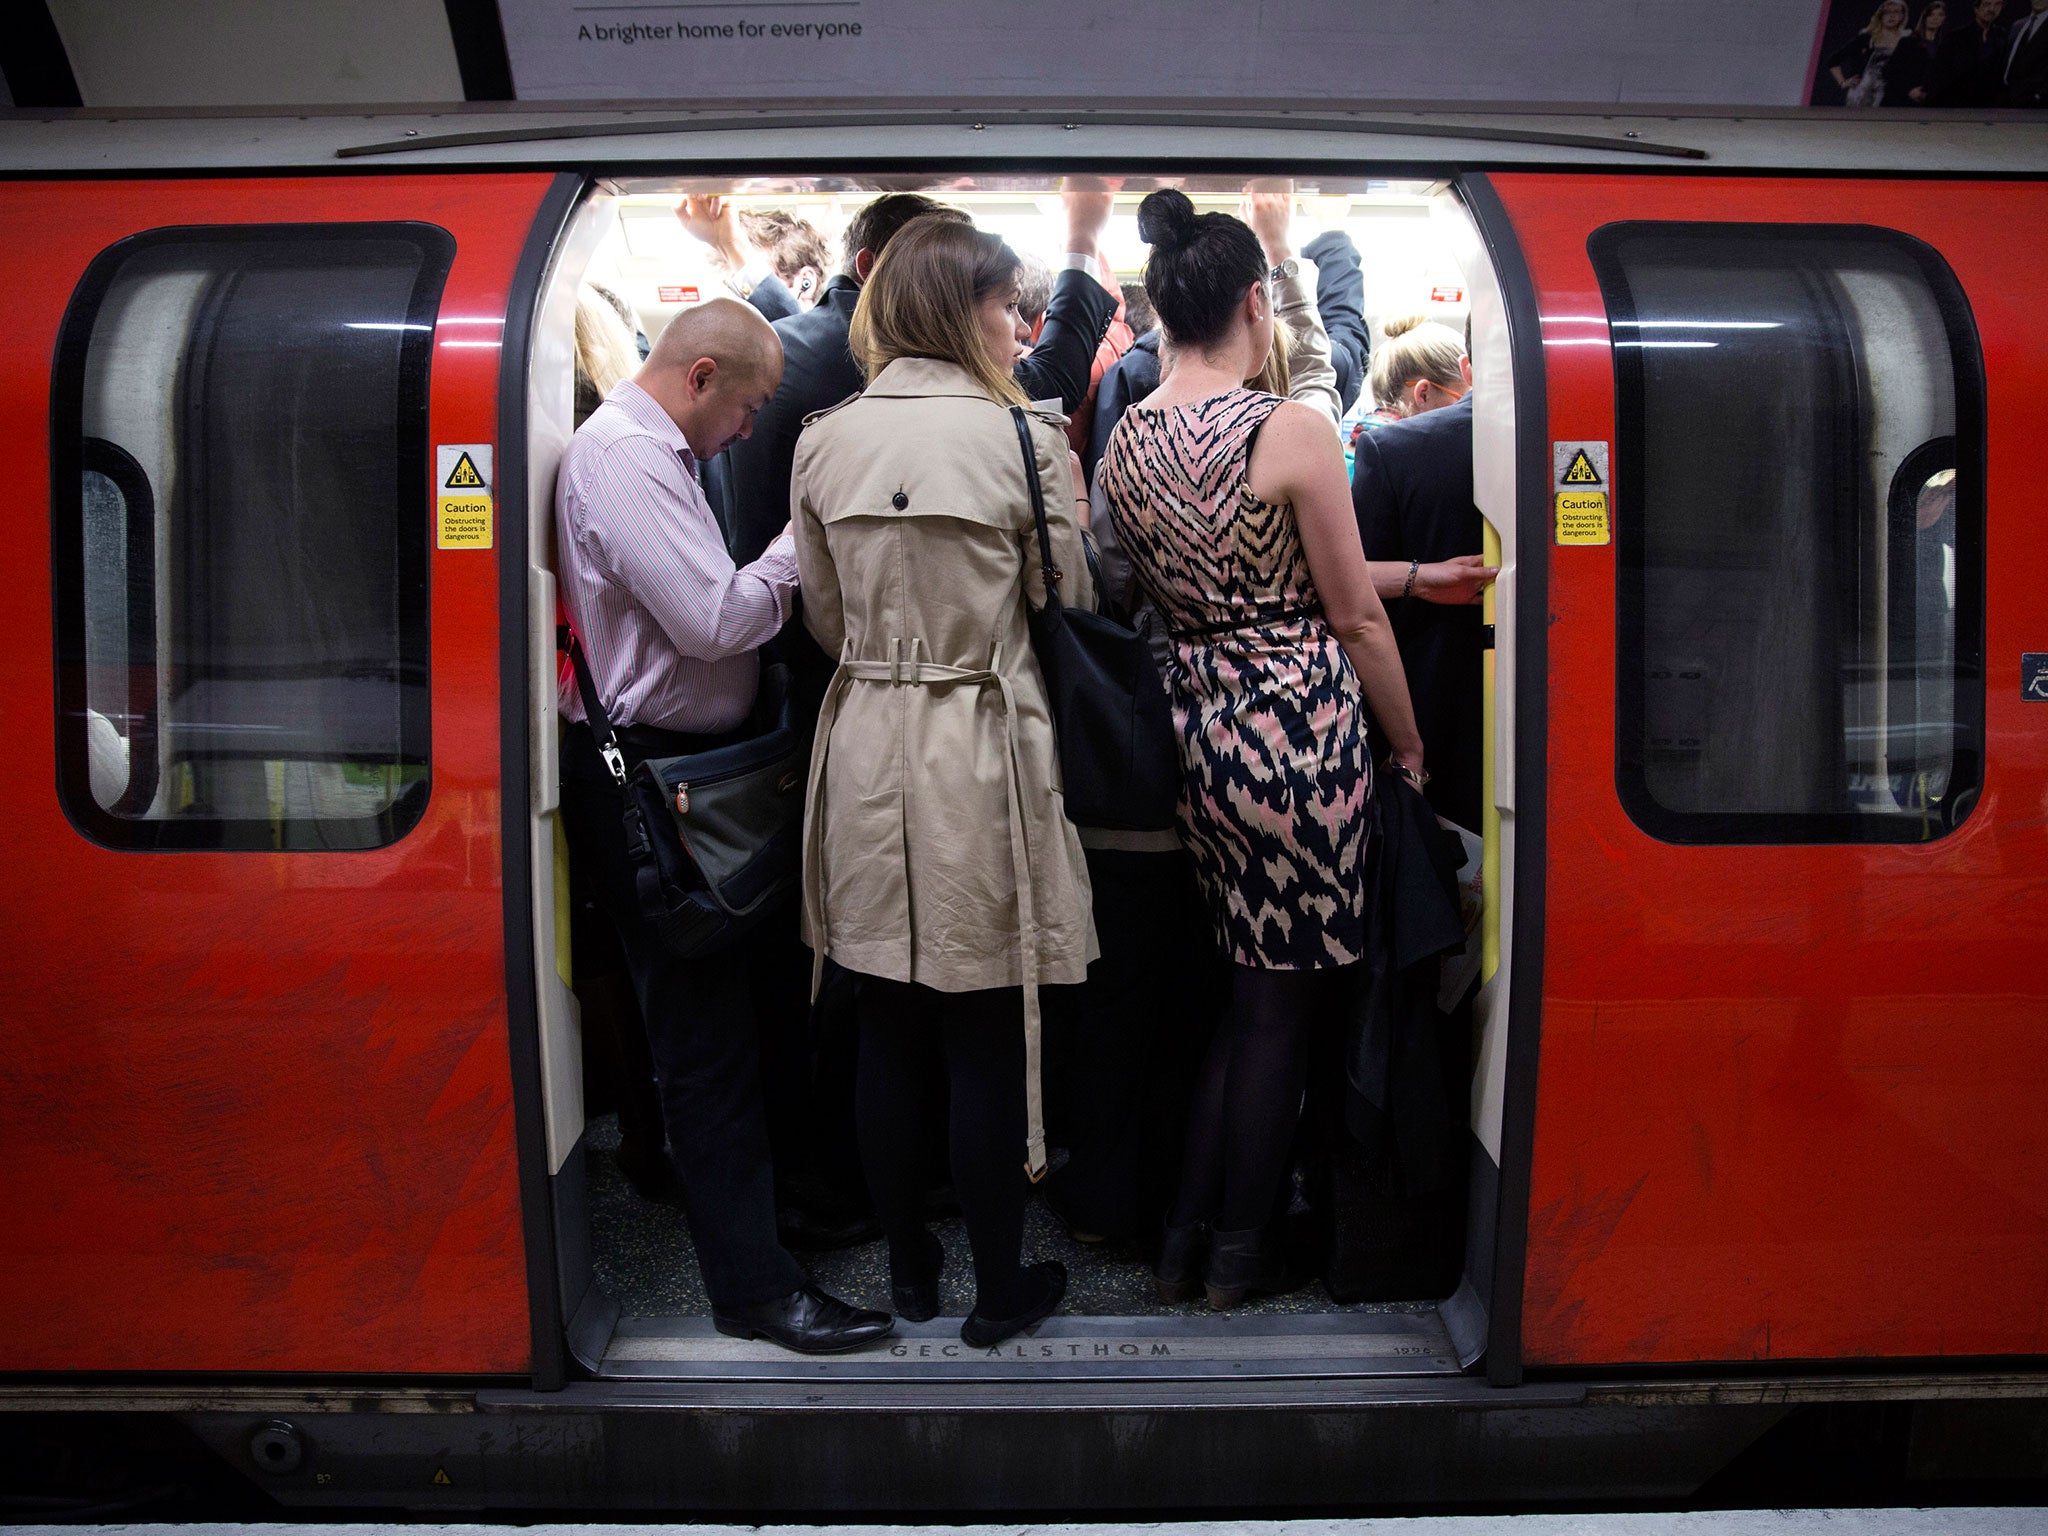 The attack happened during rush hour on the Northern Line